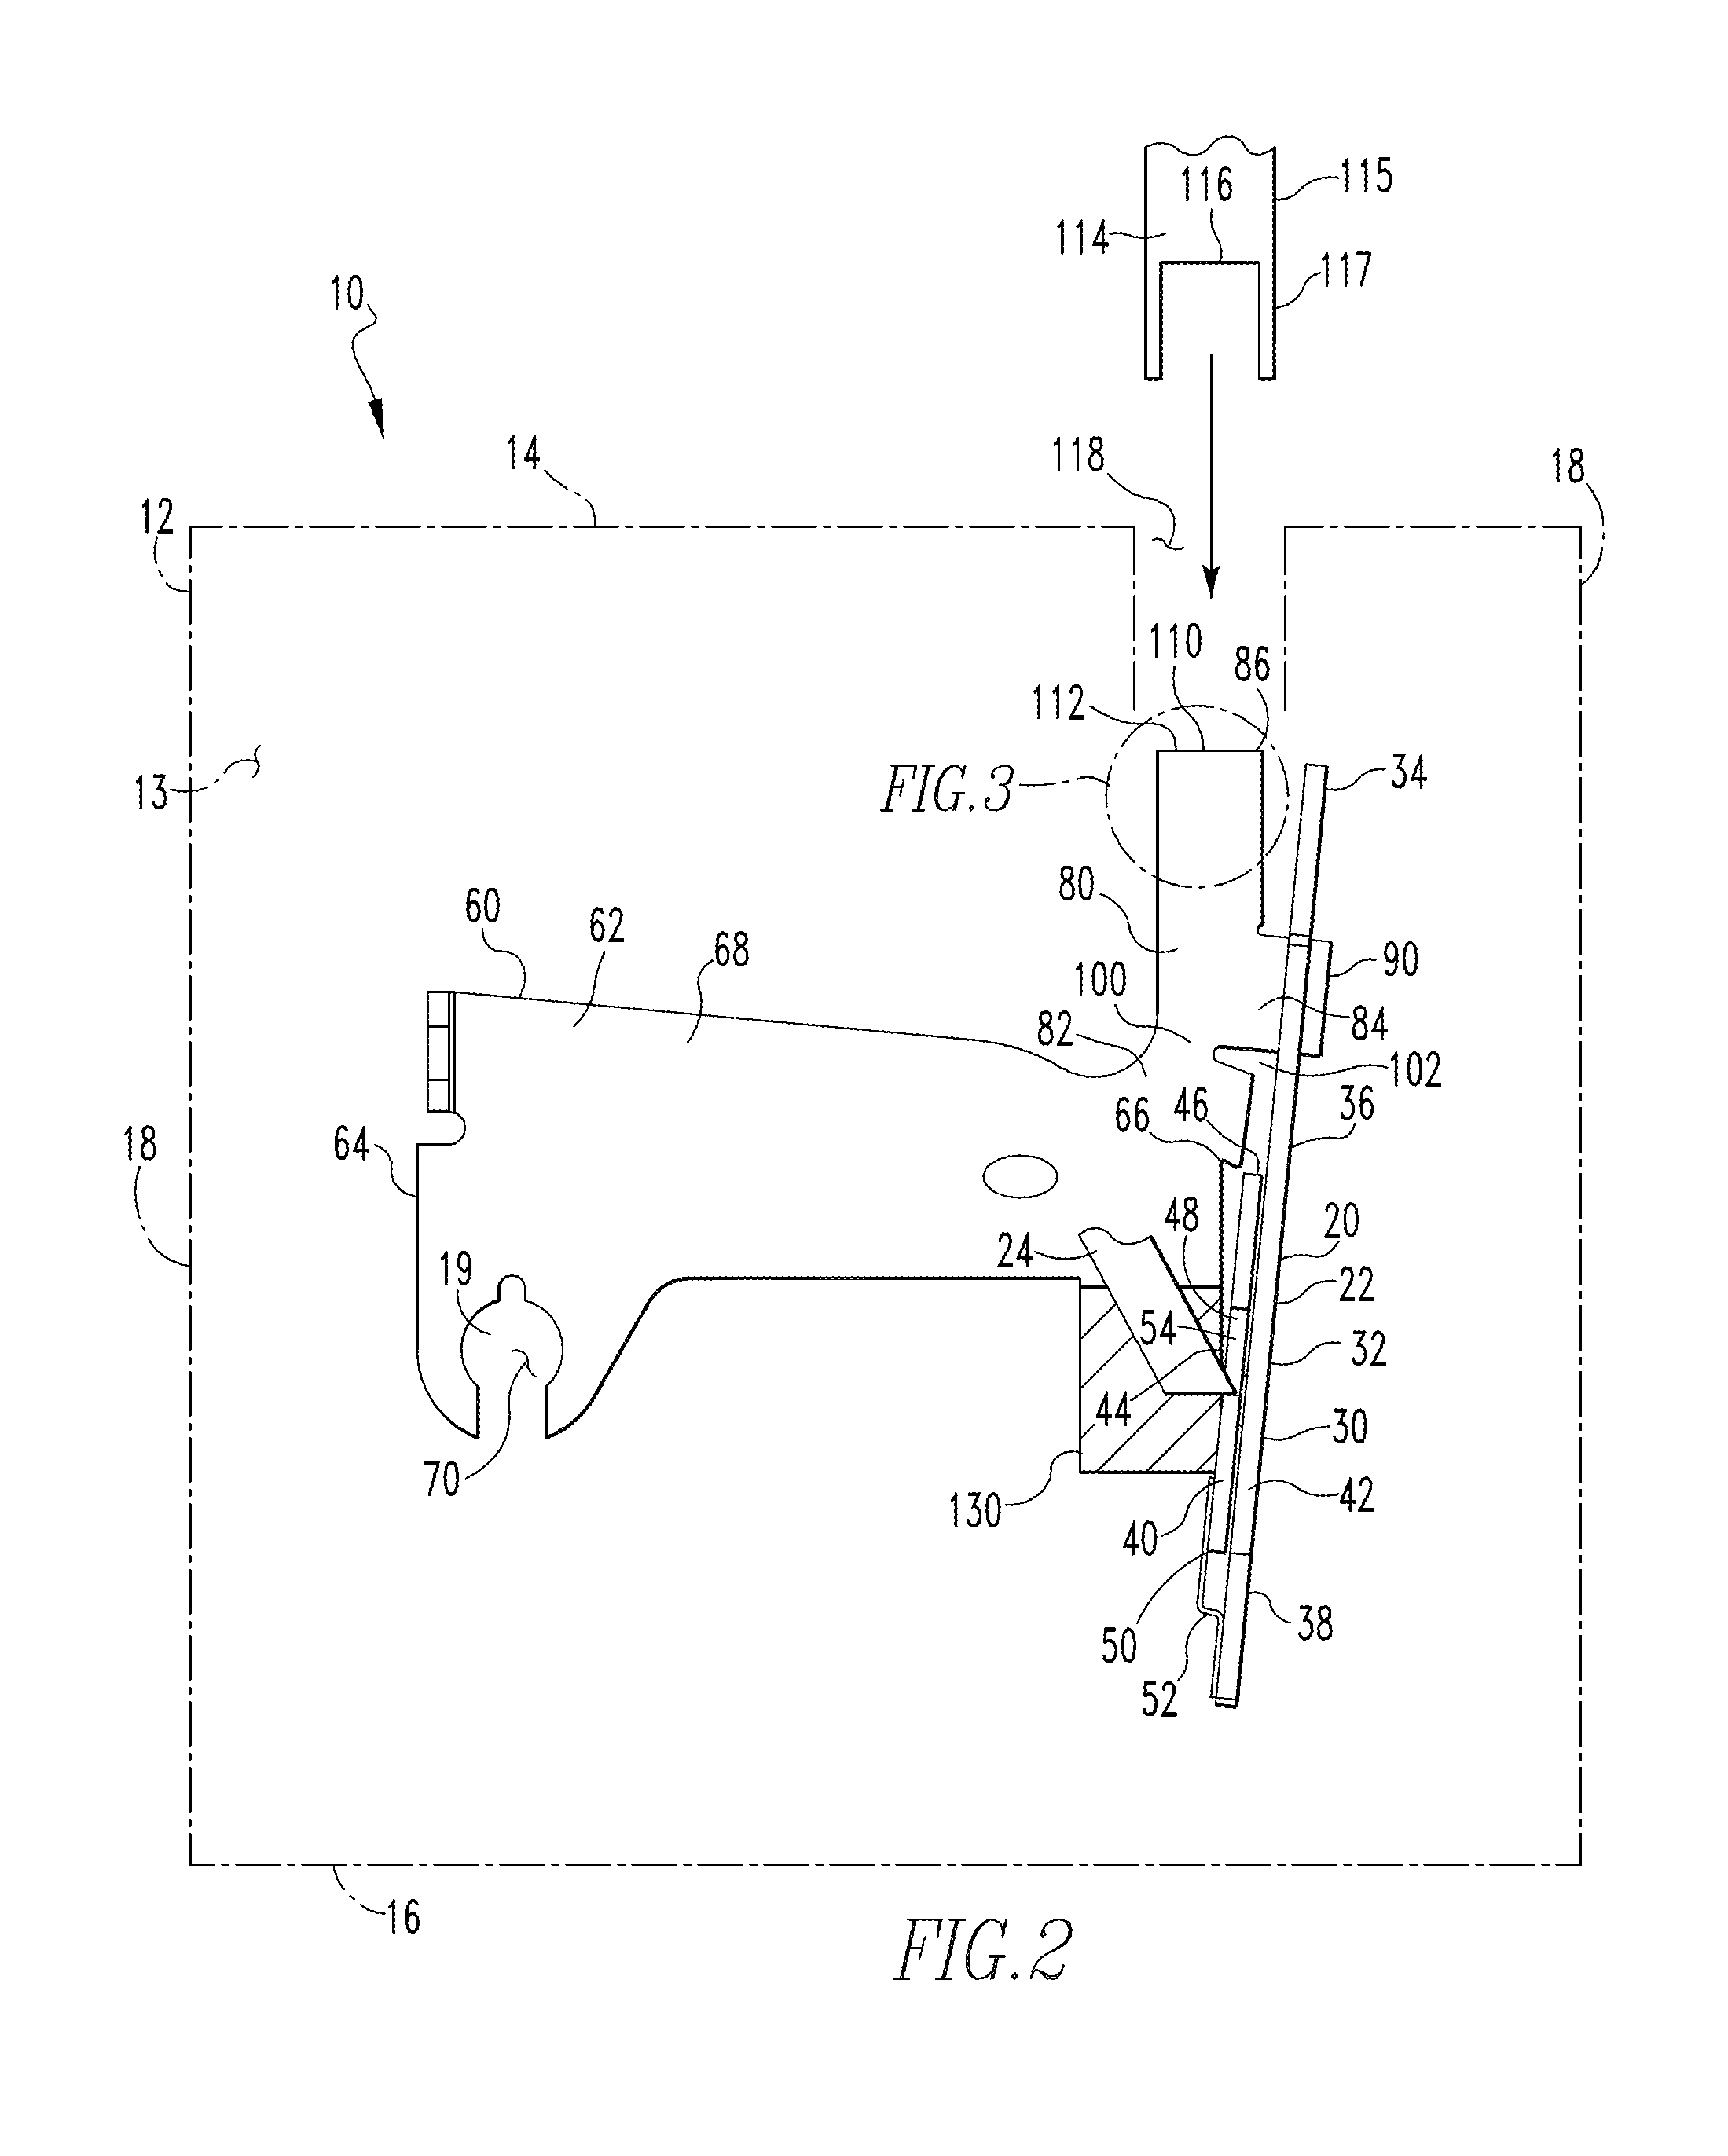 Trip device support frame and top frame calibration method